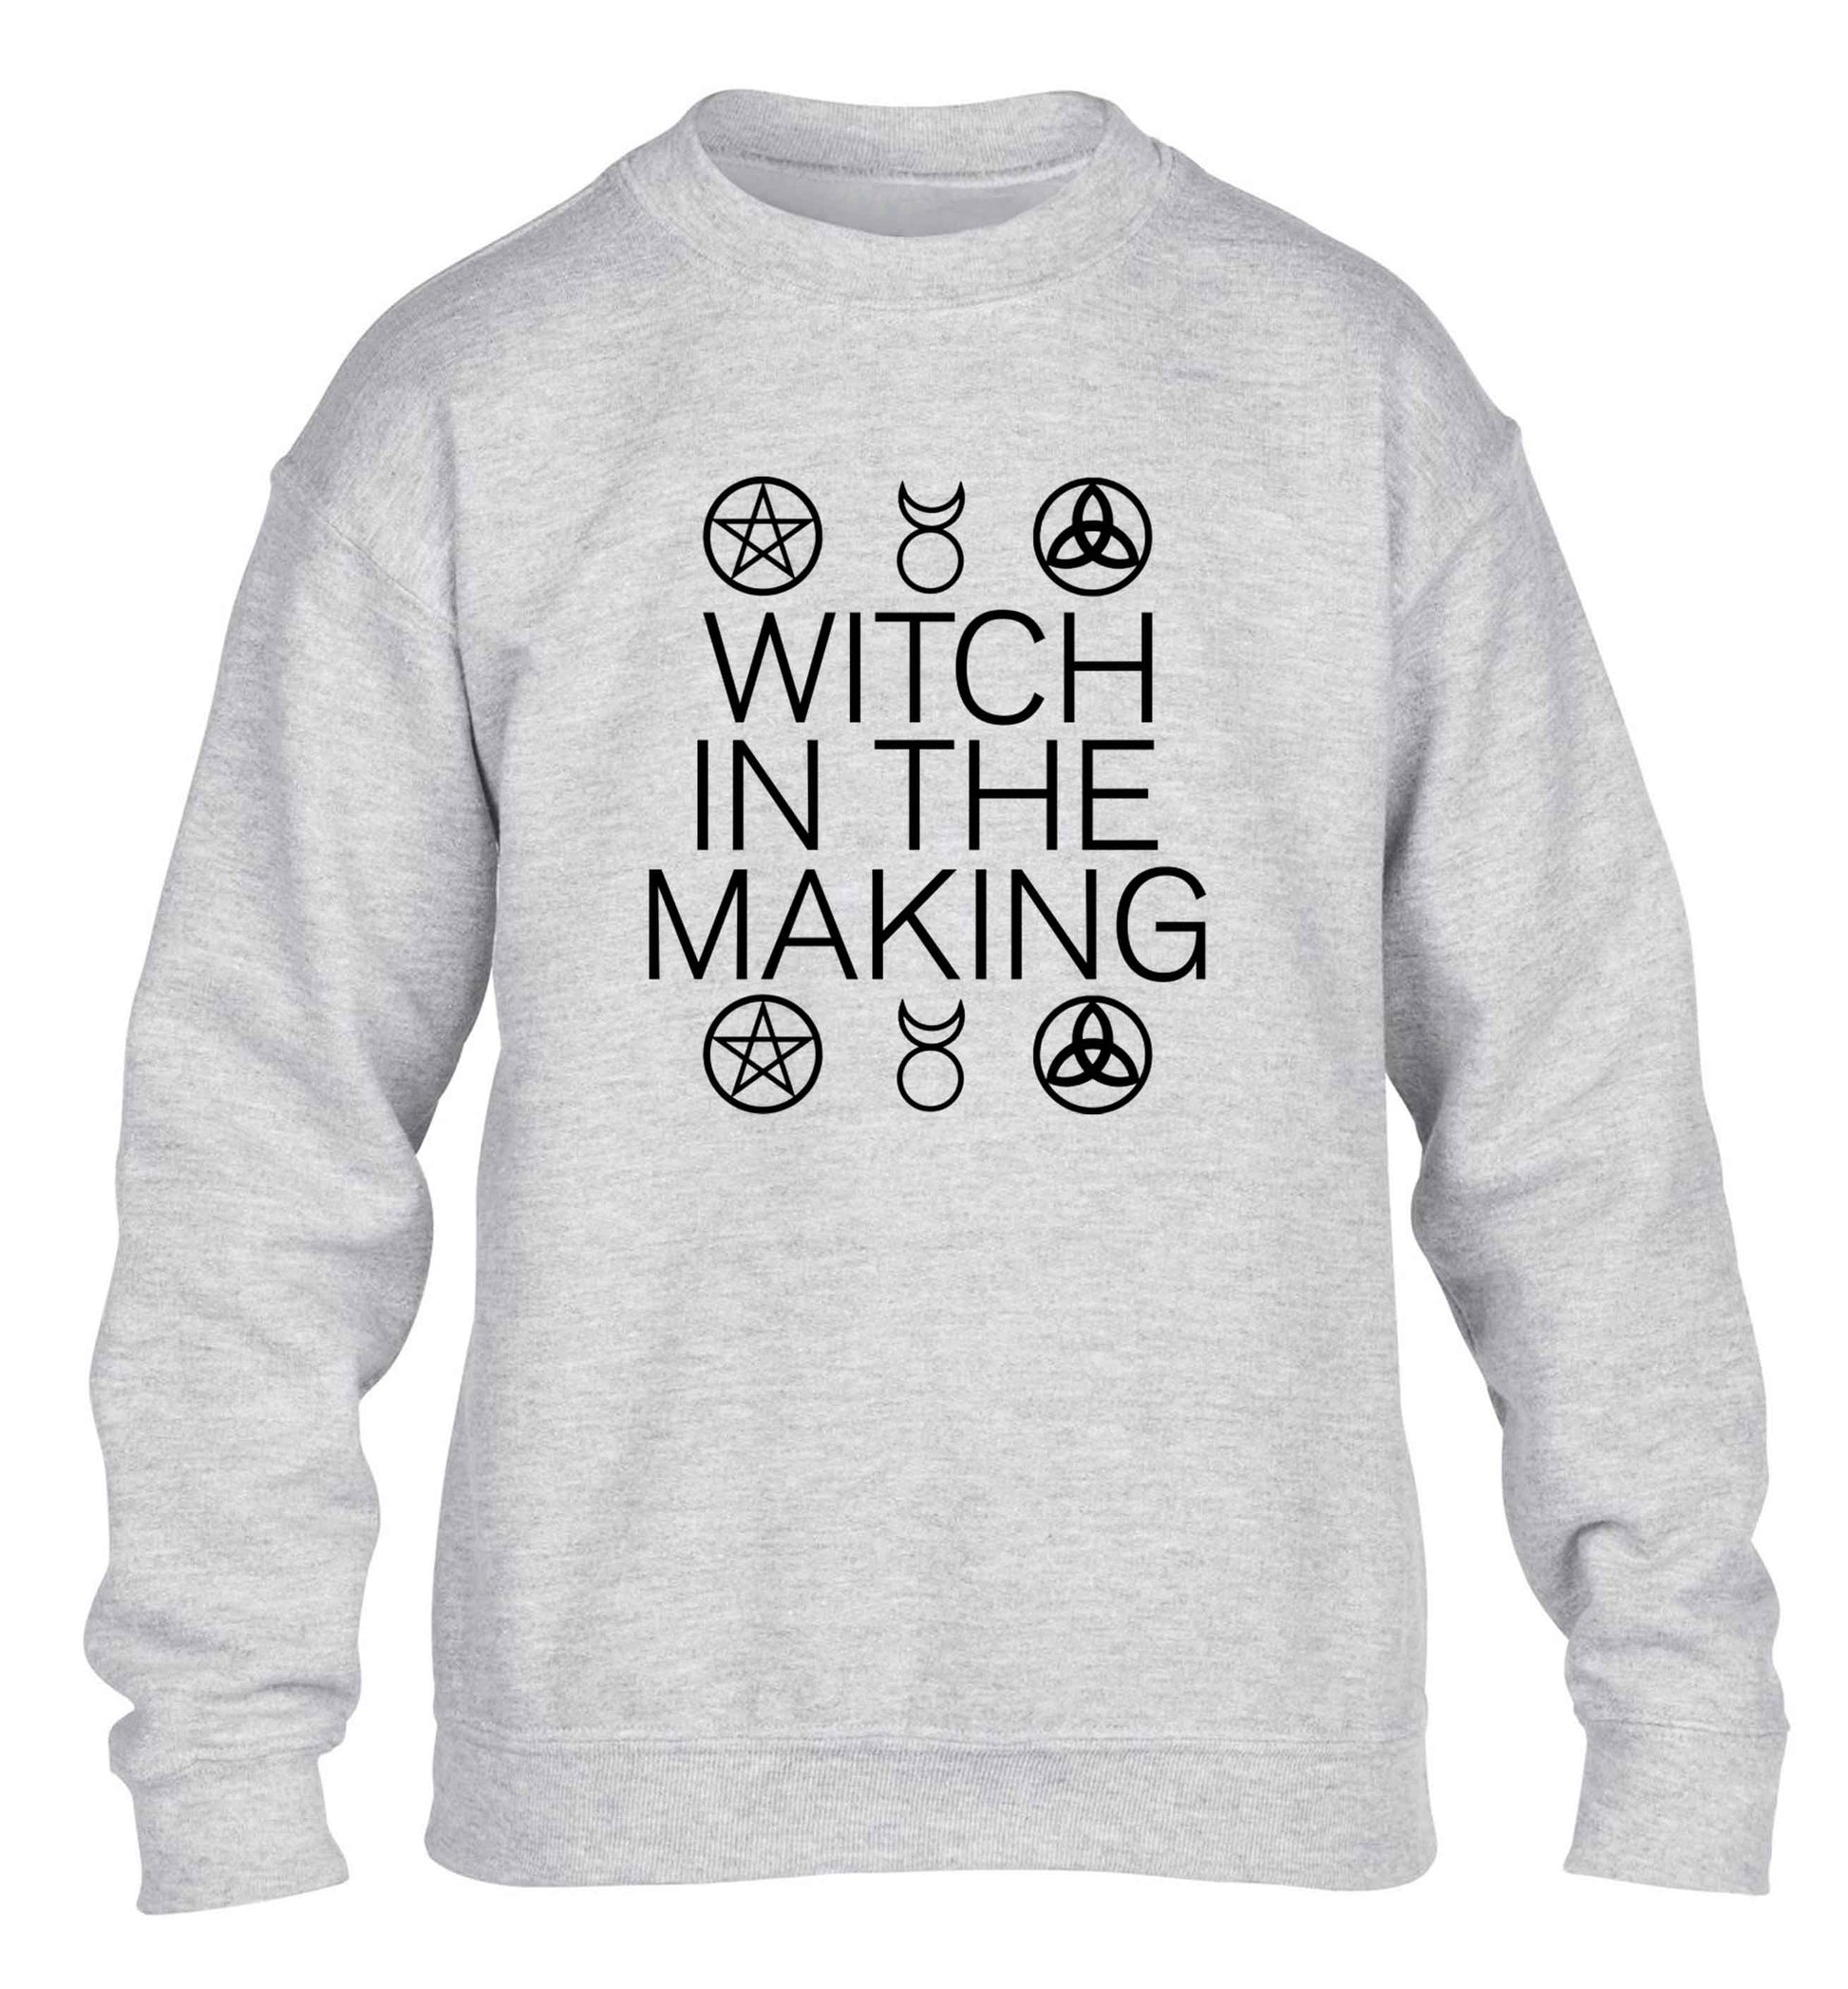 Witch in the making children's grey sweater 12-13 Years